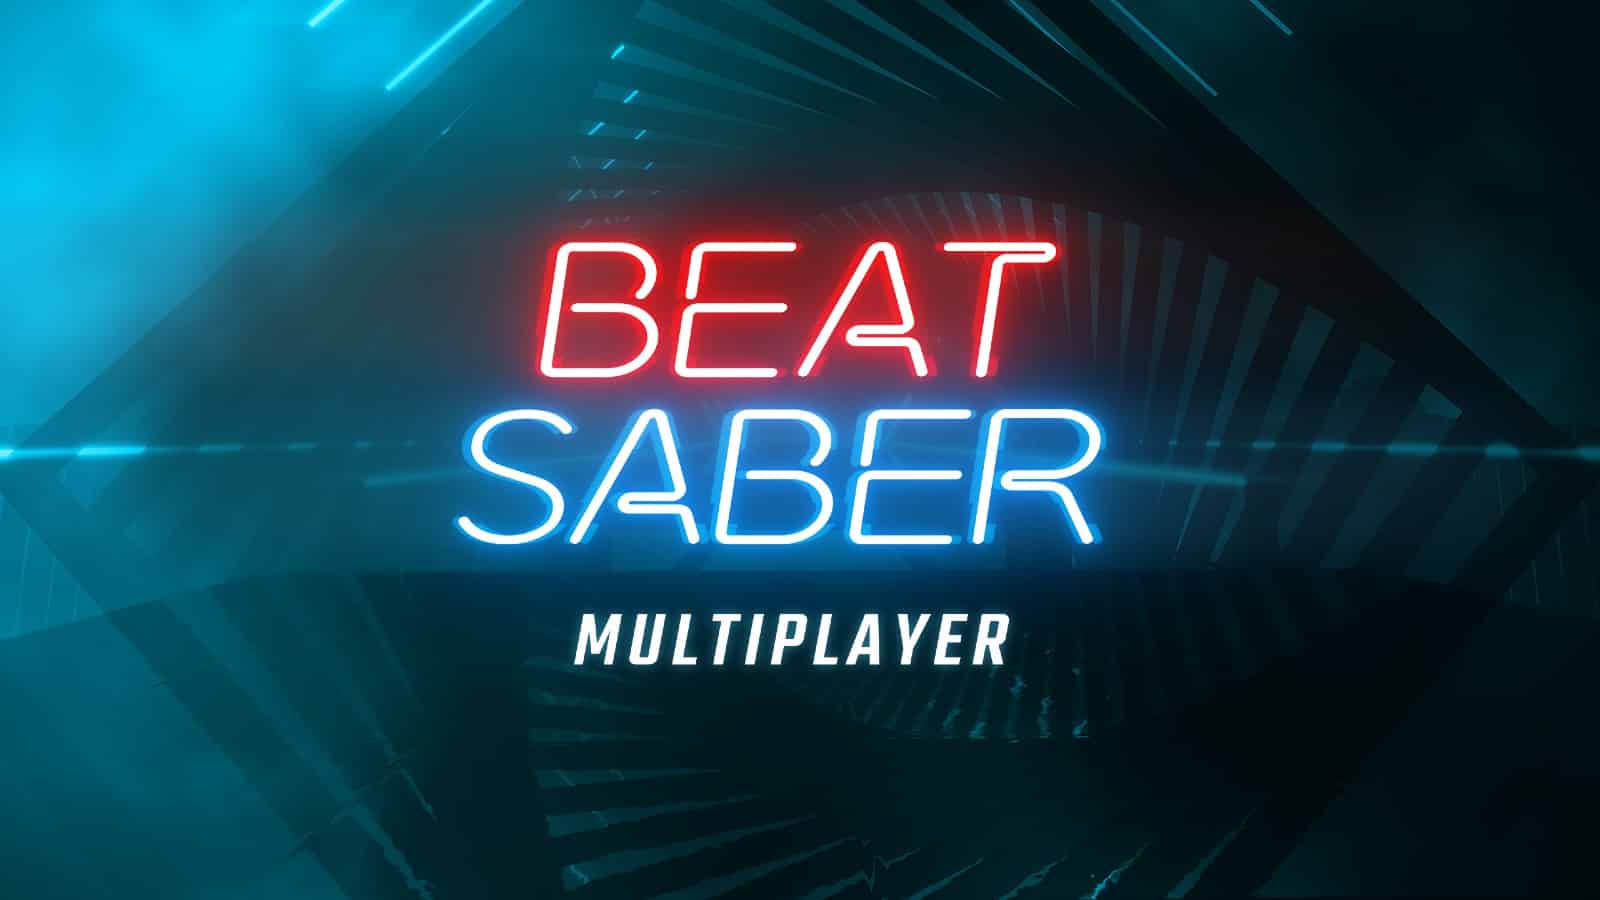 Saber multiplayer guide: How to play with friends on PS4, Oculus and PC - Dexerto